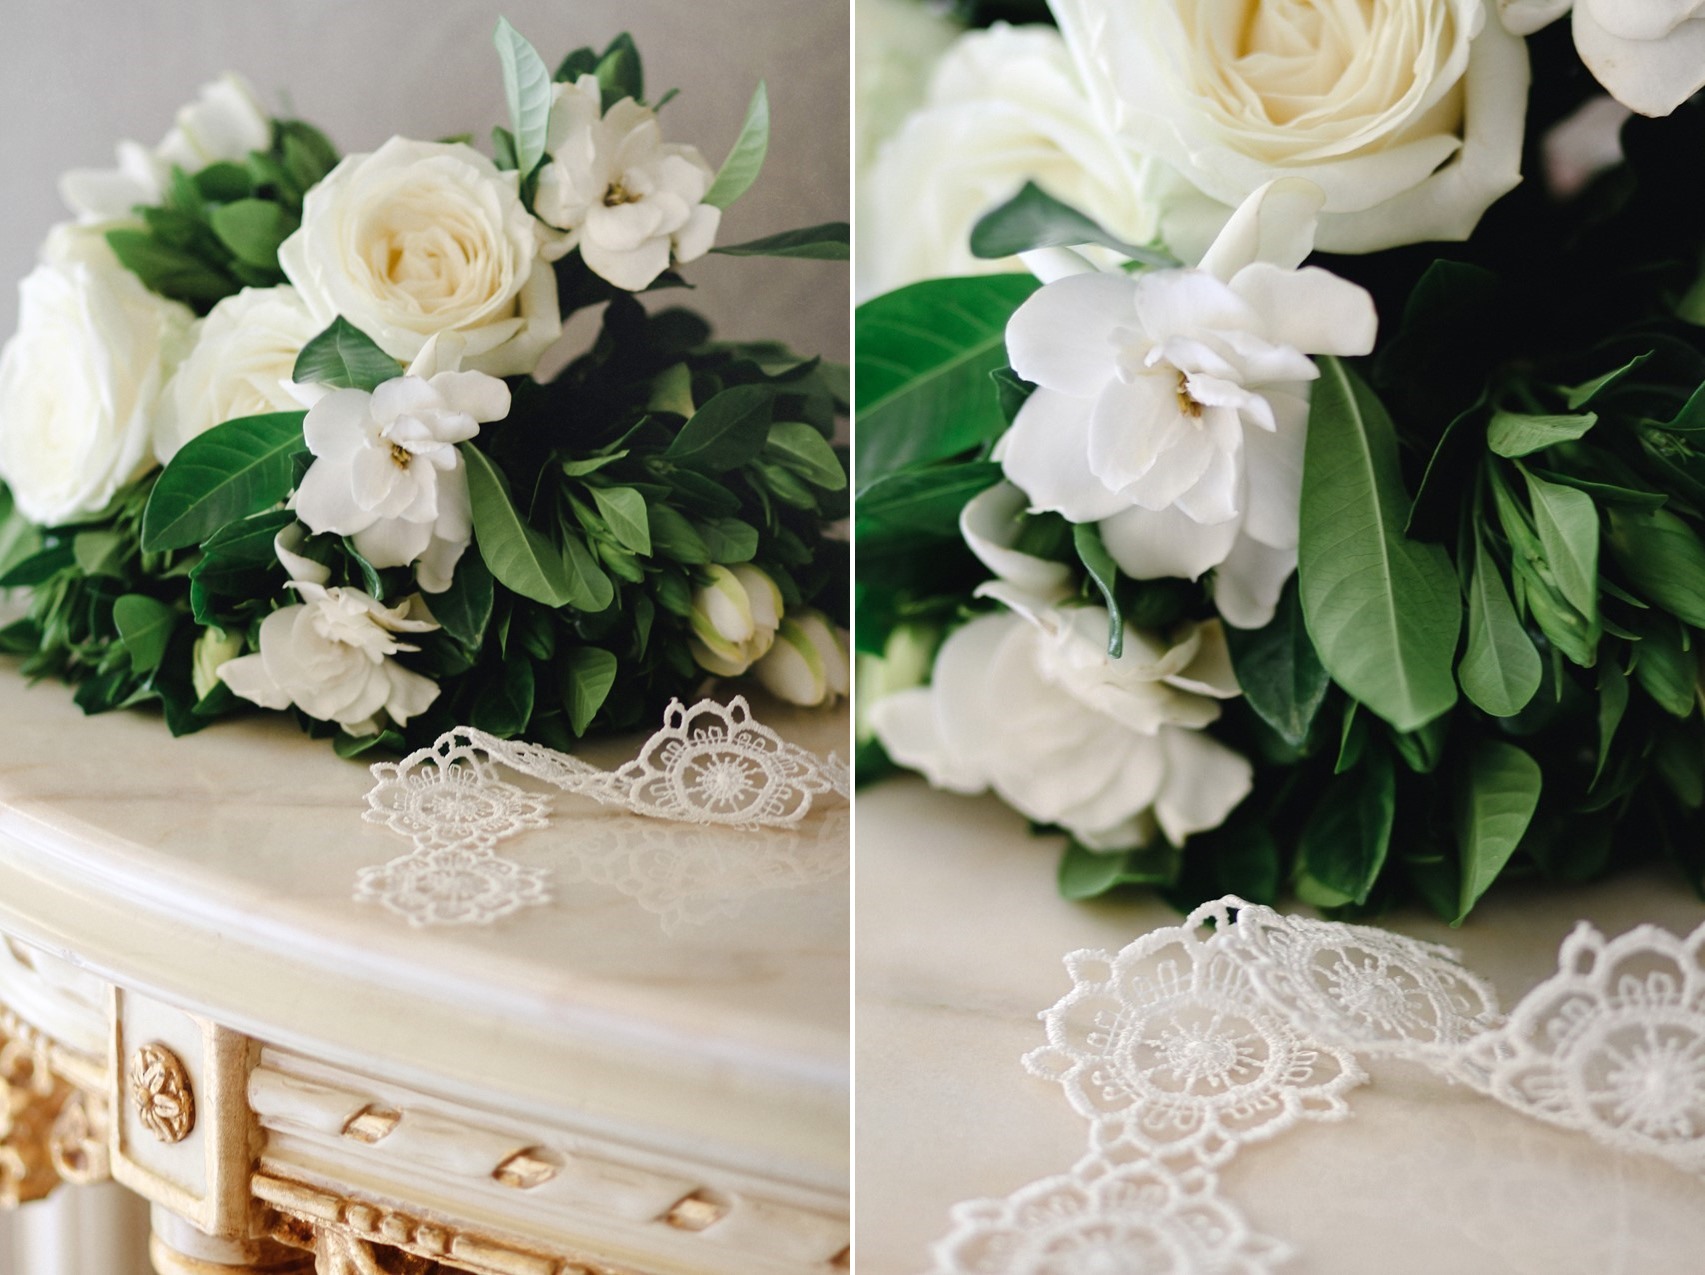 The Most Romantic Bridal Shoot in a Venetian Palace